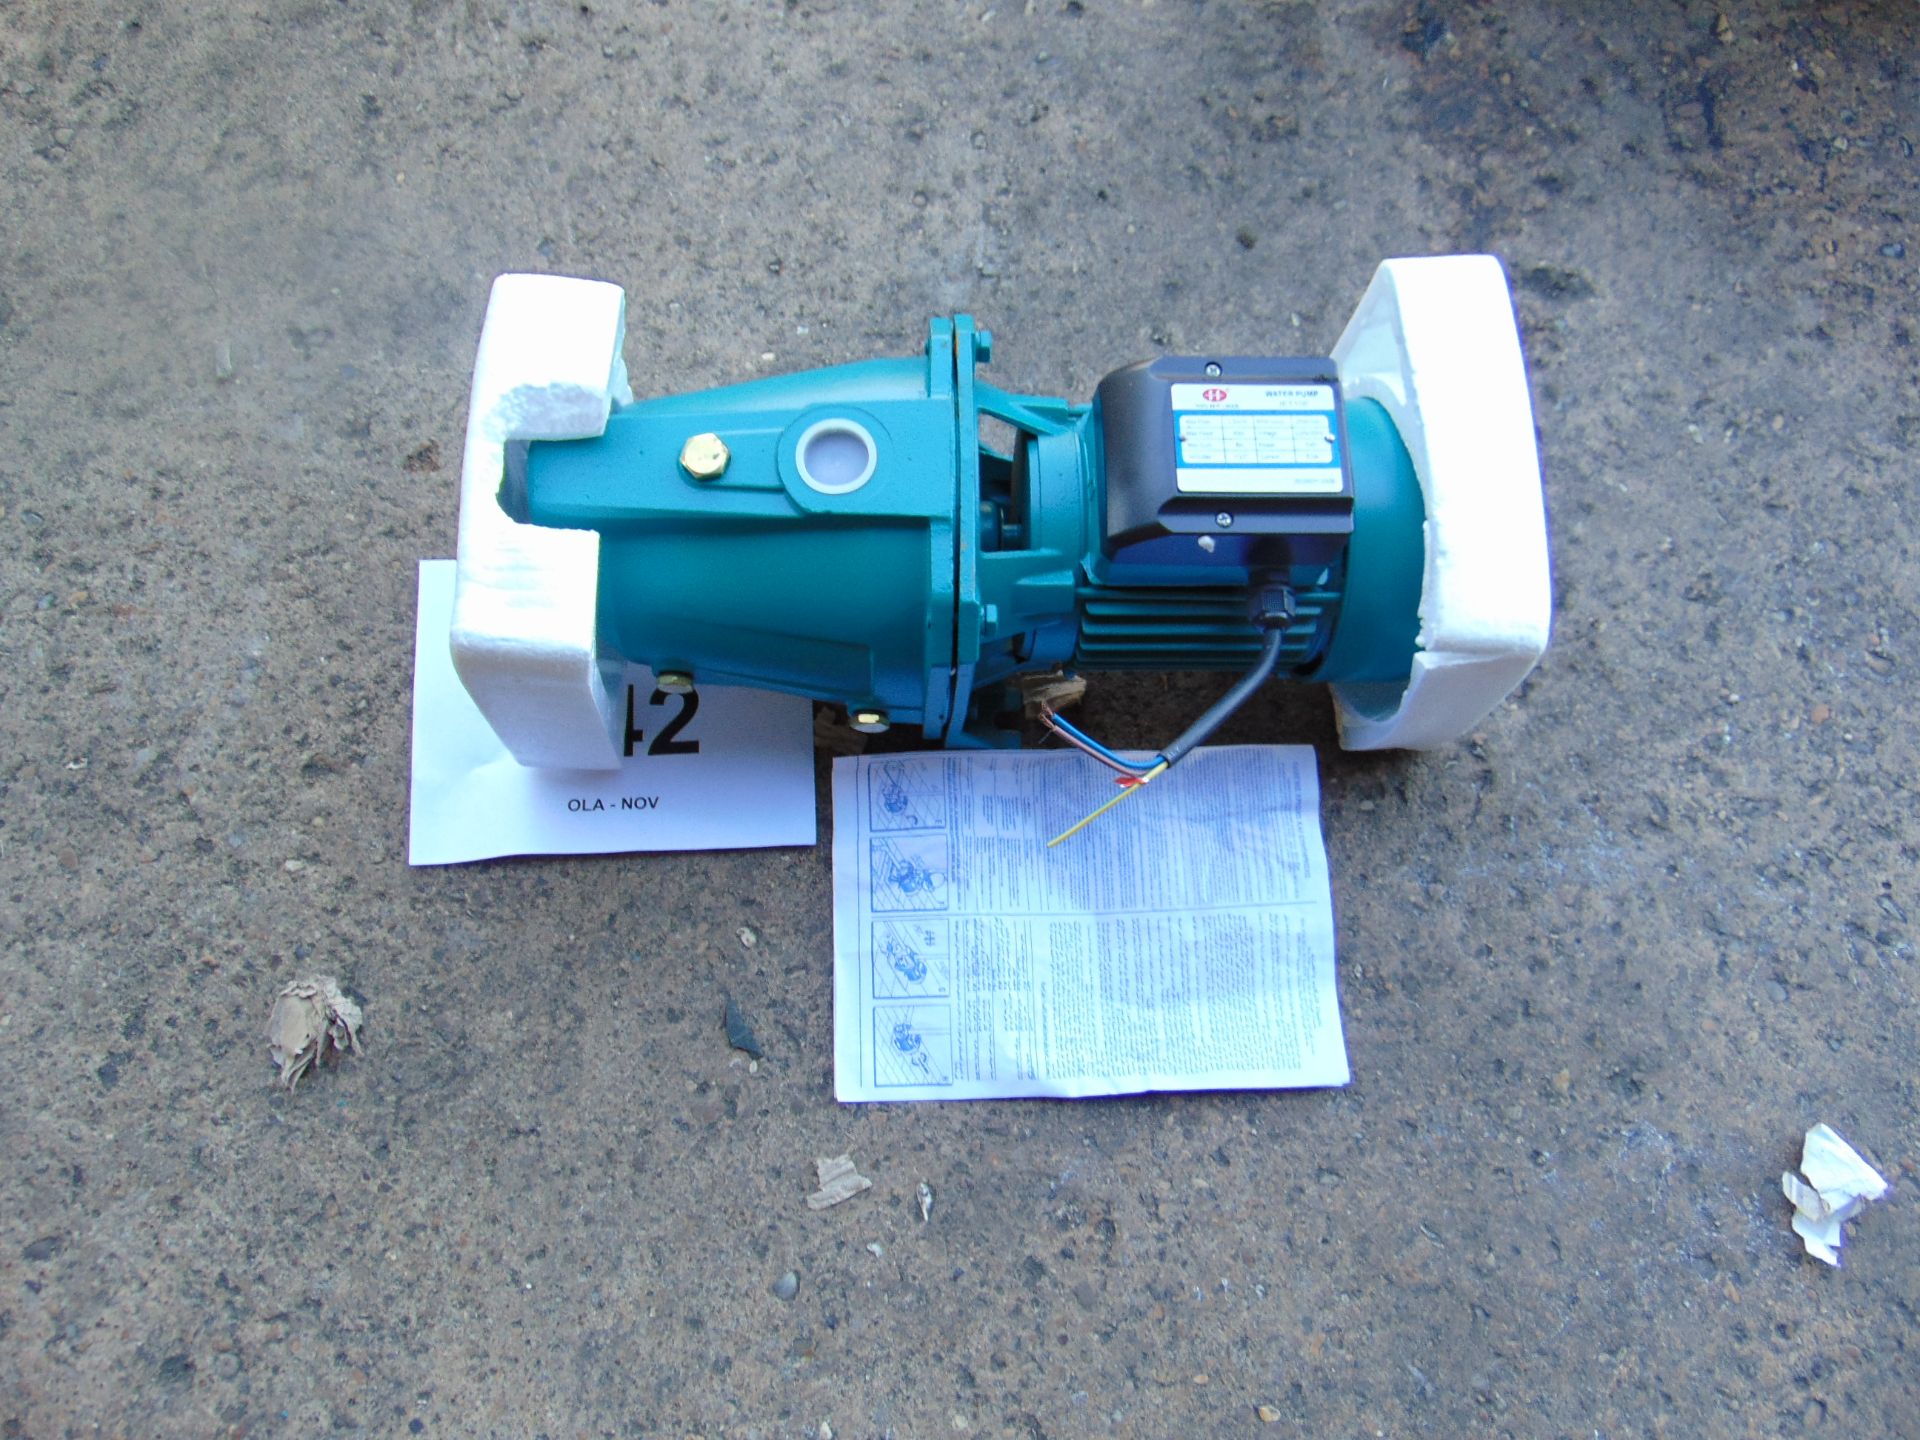 New Unused 240 Volt Jet 100 Water Pump c/w Instructions as shown - Image 6 of 6